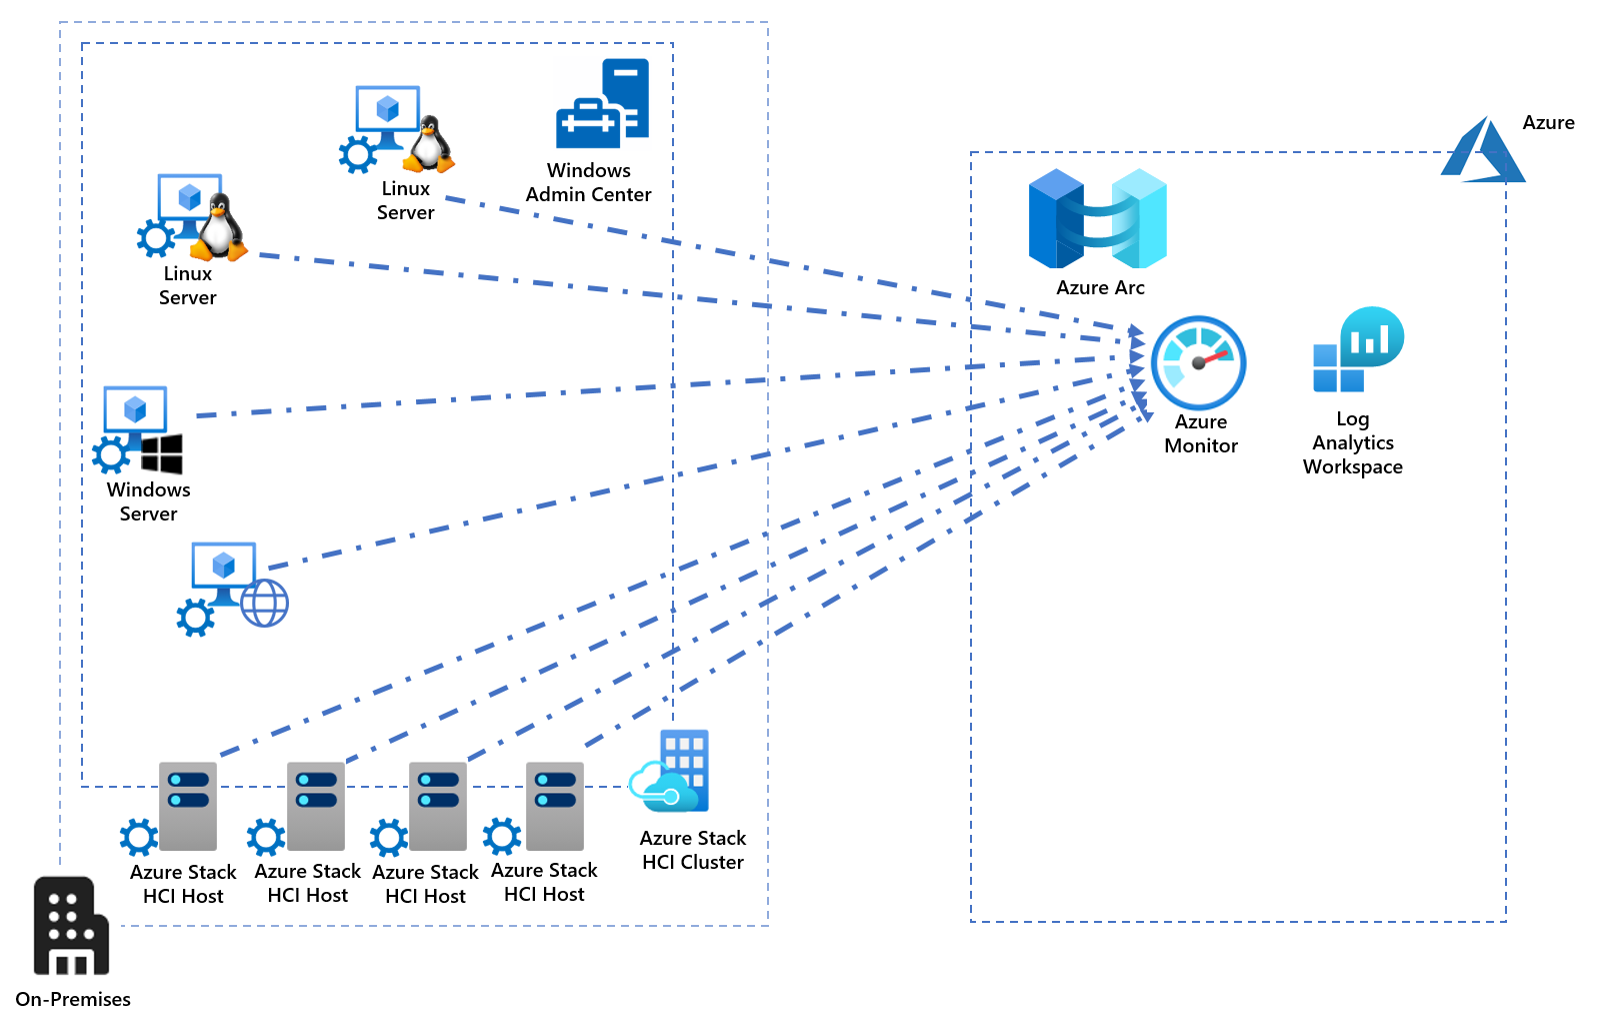 The diagram depicts how Microsoft Azure Stack HCI integrates with Azure Monitor through agents installed on cluster nodes, and optionally on Windows and Linux server virtual machines (VMs) running on the cluster. The agents collect and upload logs and performance metrics to a Log Analytics workspace. Windows Admin Center streamlines the onboarding process. Microsoft Azure Arc provides additional capabilities, such as automated installation of the agents on Azure Stack HCI VMs.